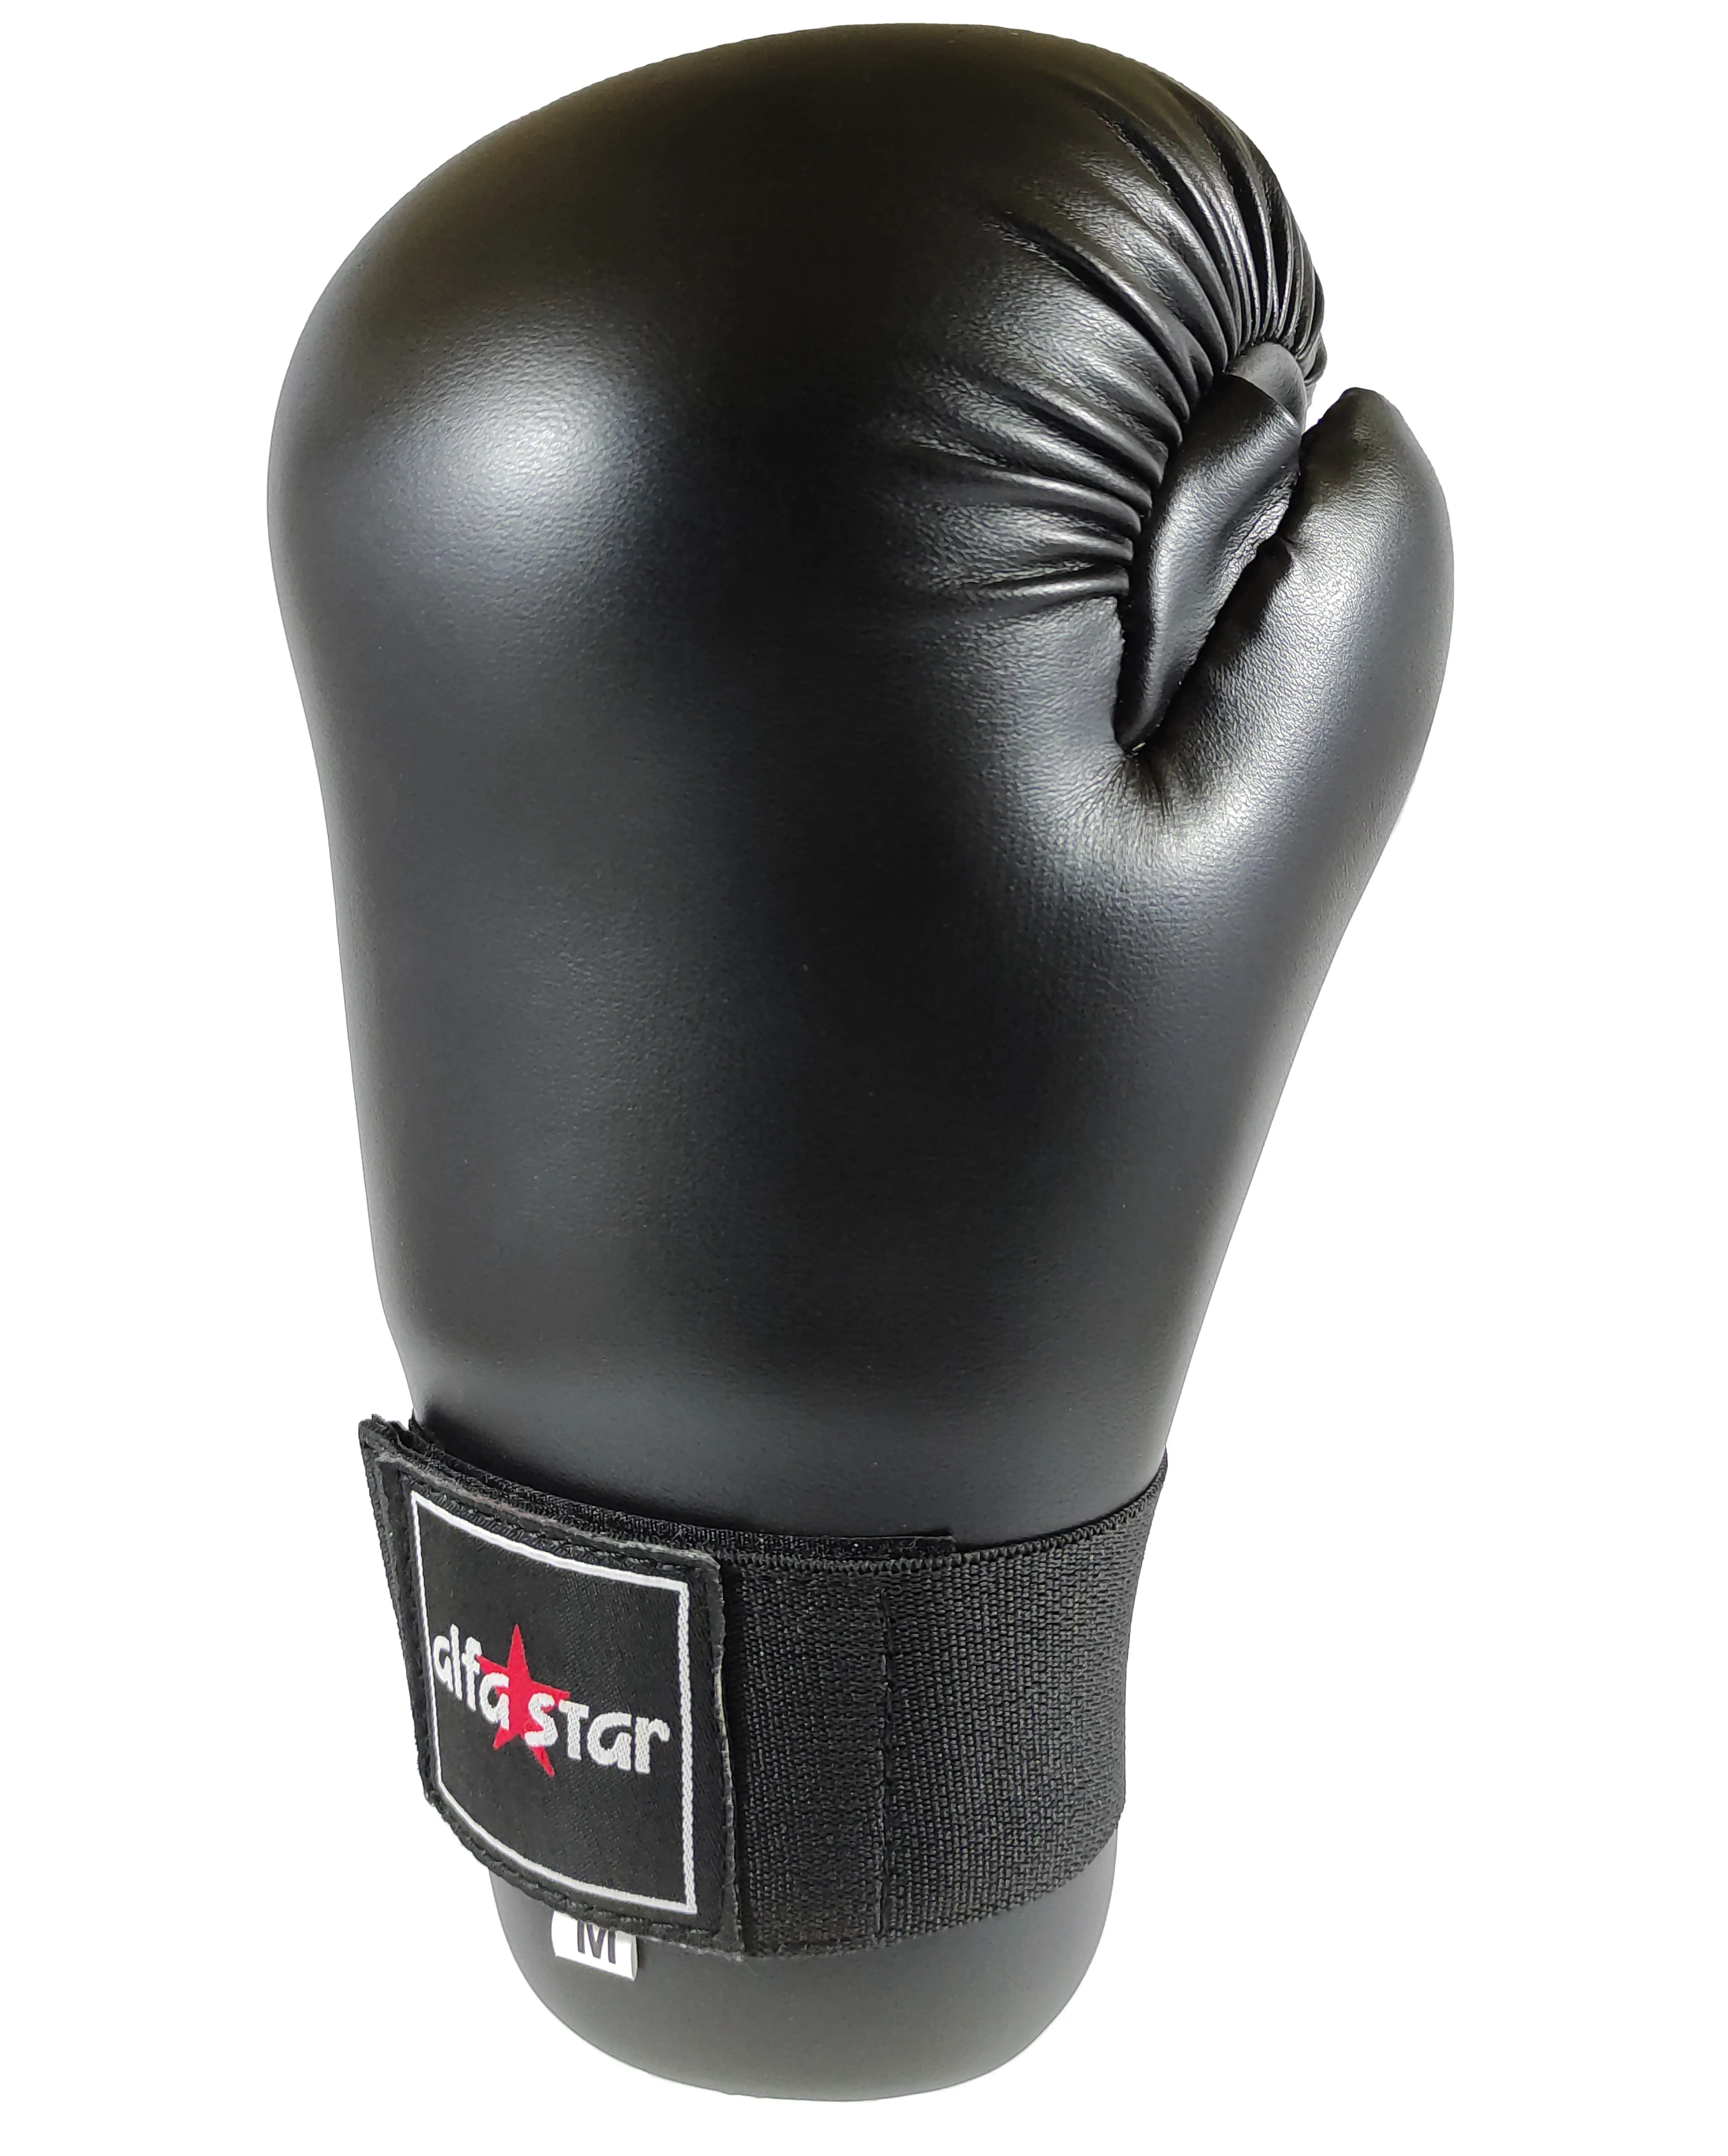 New Wholesale high quality Boxing Gloves Punching leather Gloves Sports Boxing Gloves for kick boxing professional use